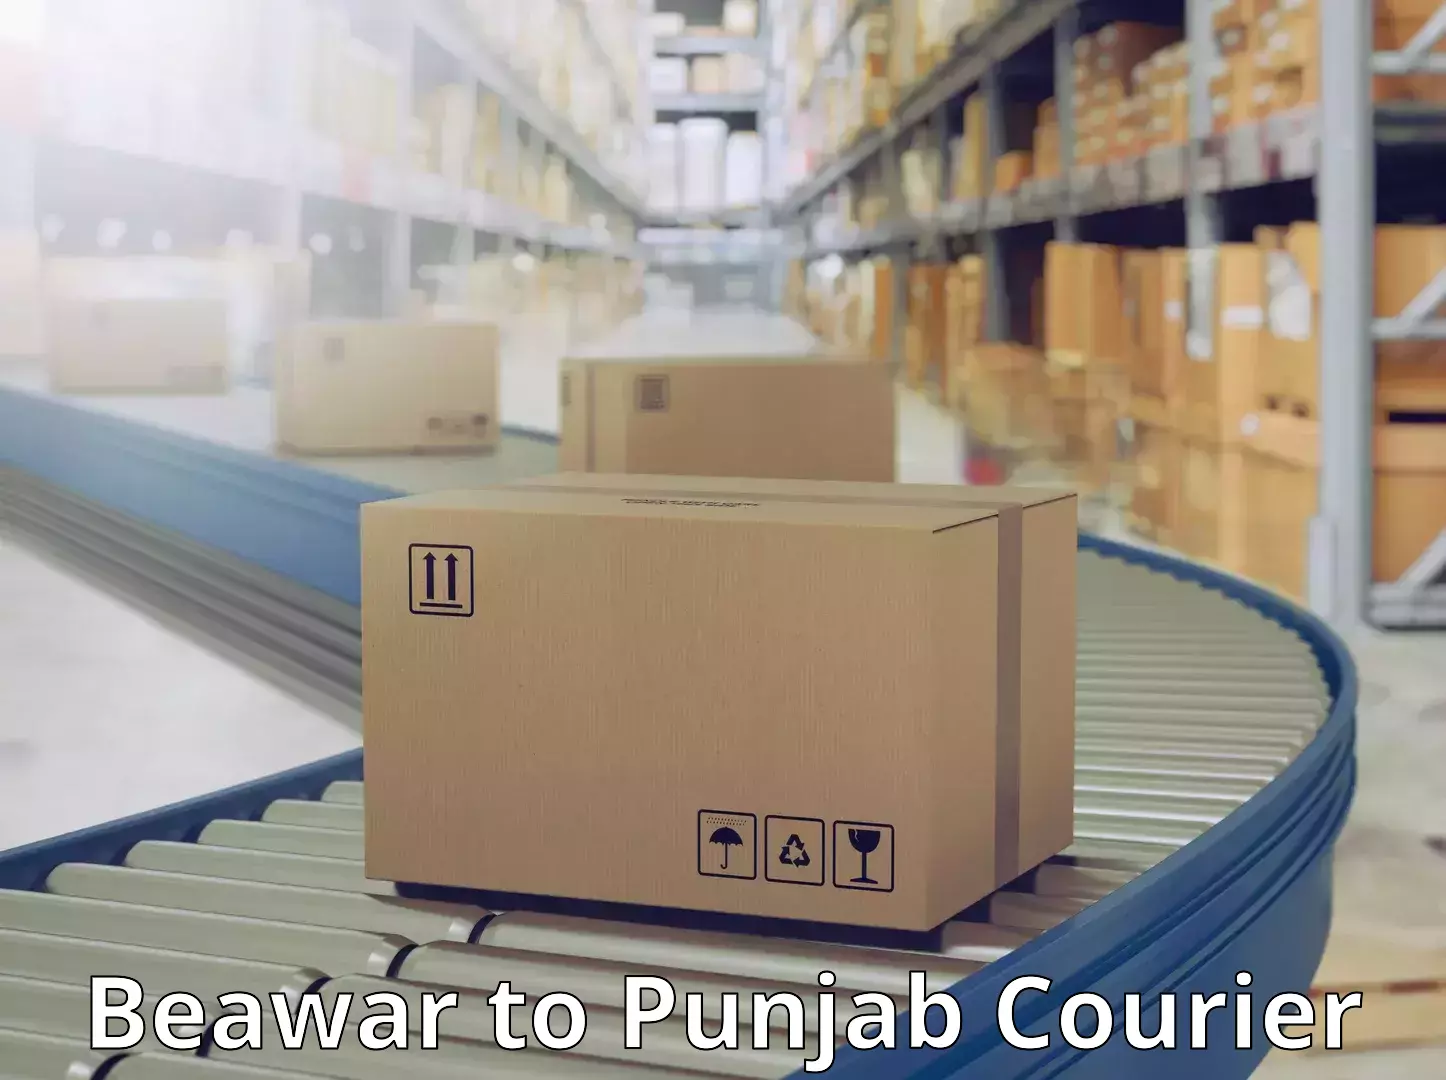 Corporate courier solutions Beawar to Abohar